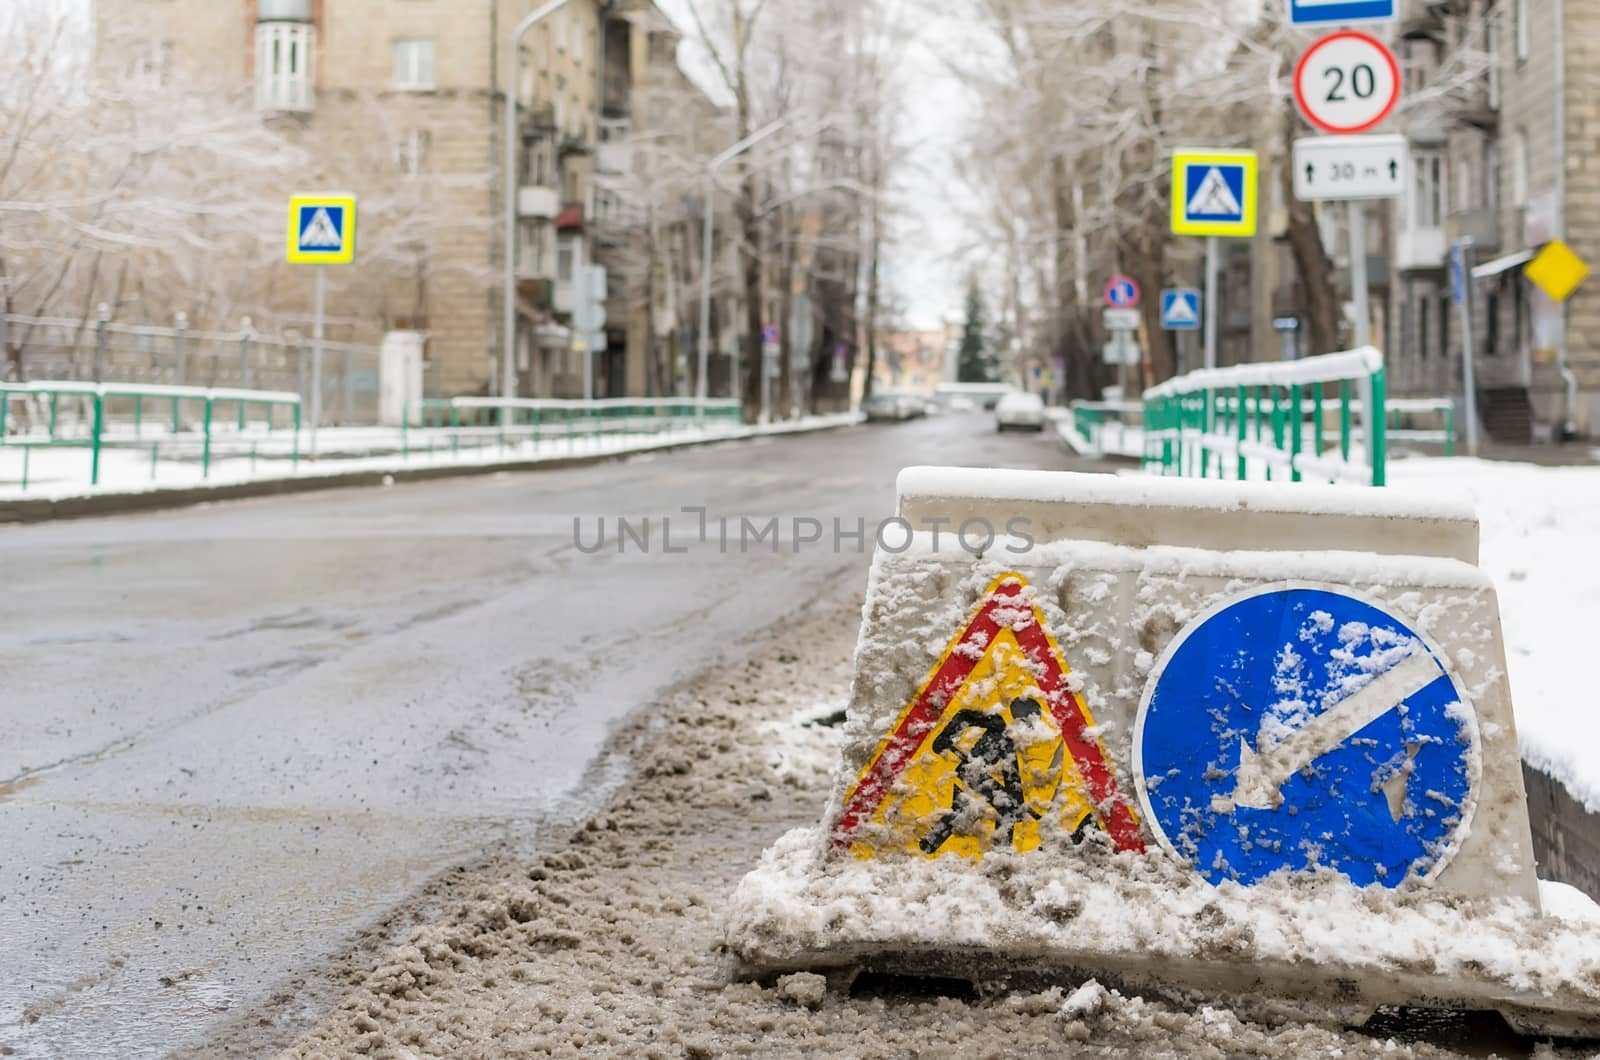 snow-swept road sign, road repair, stands on the roadway of the city street by jk3030